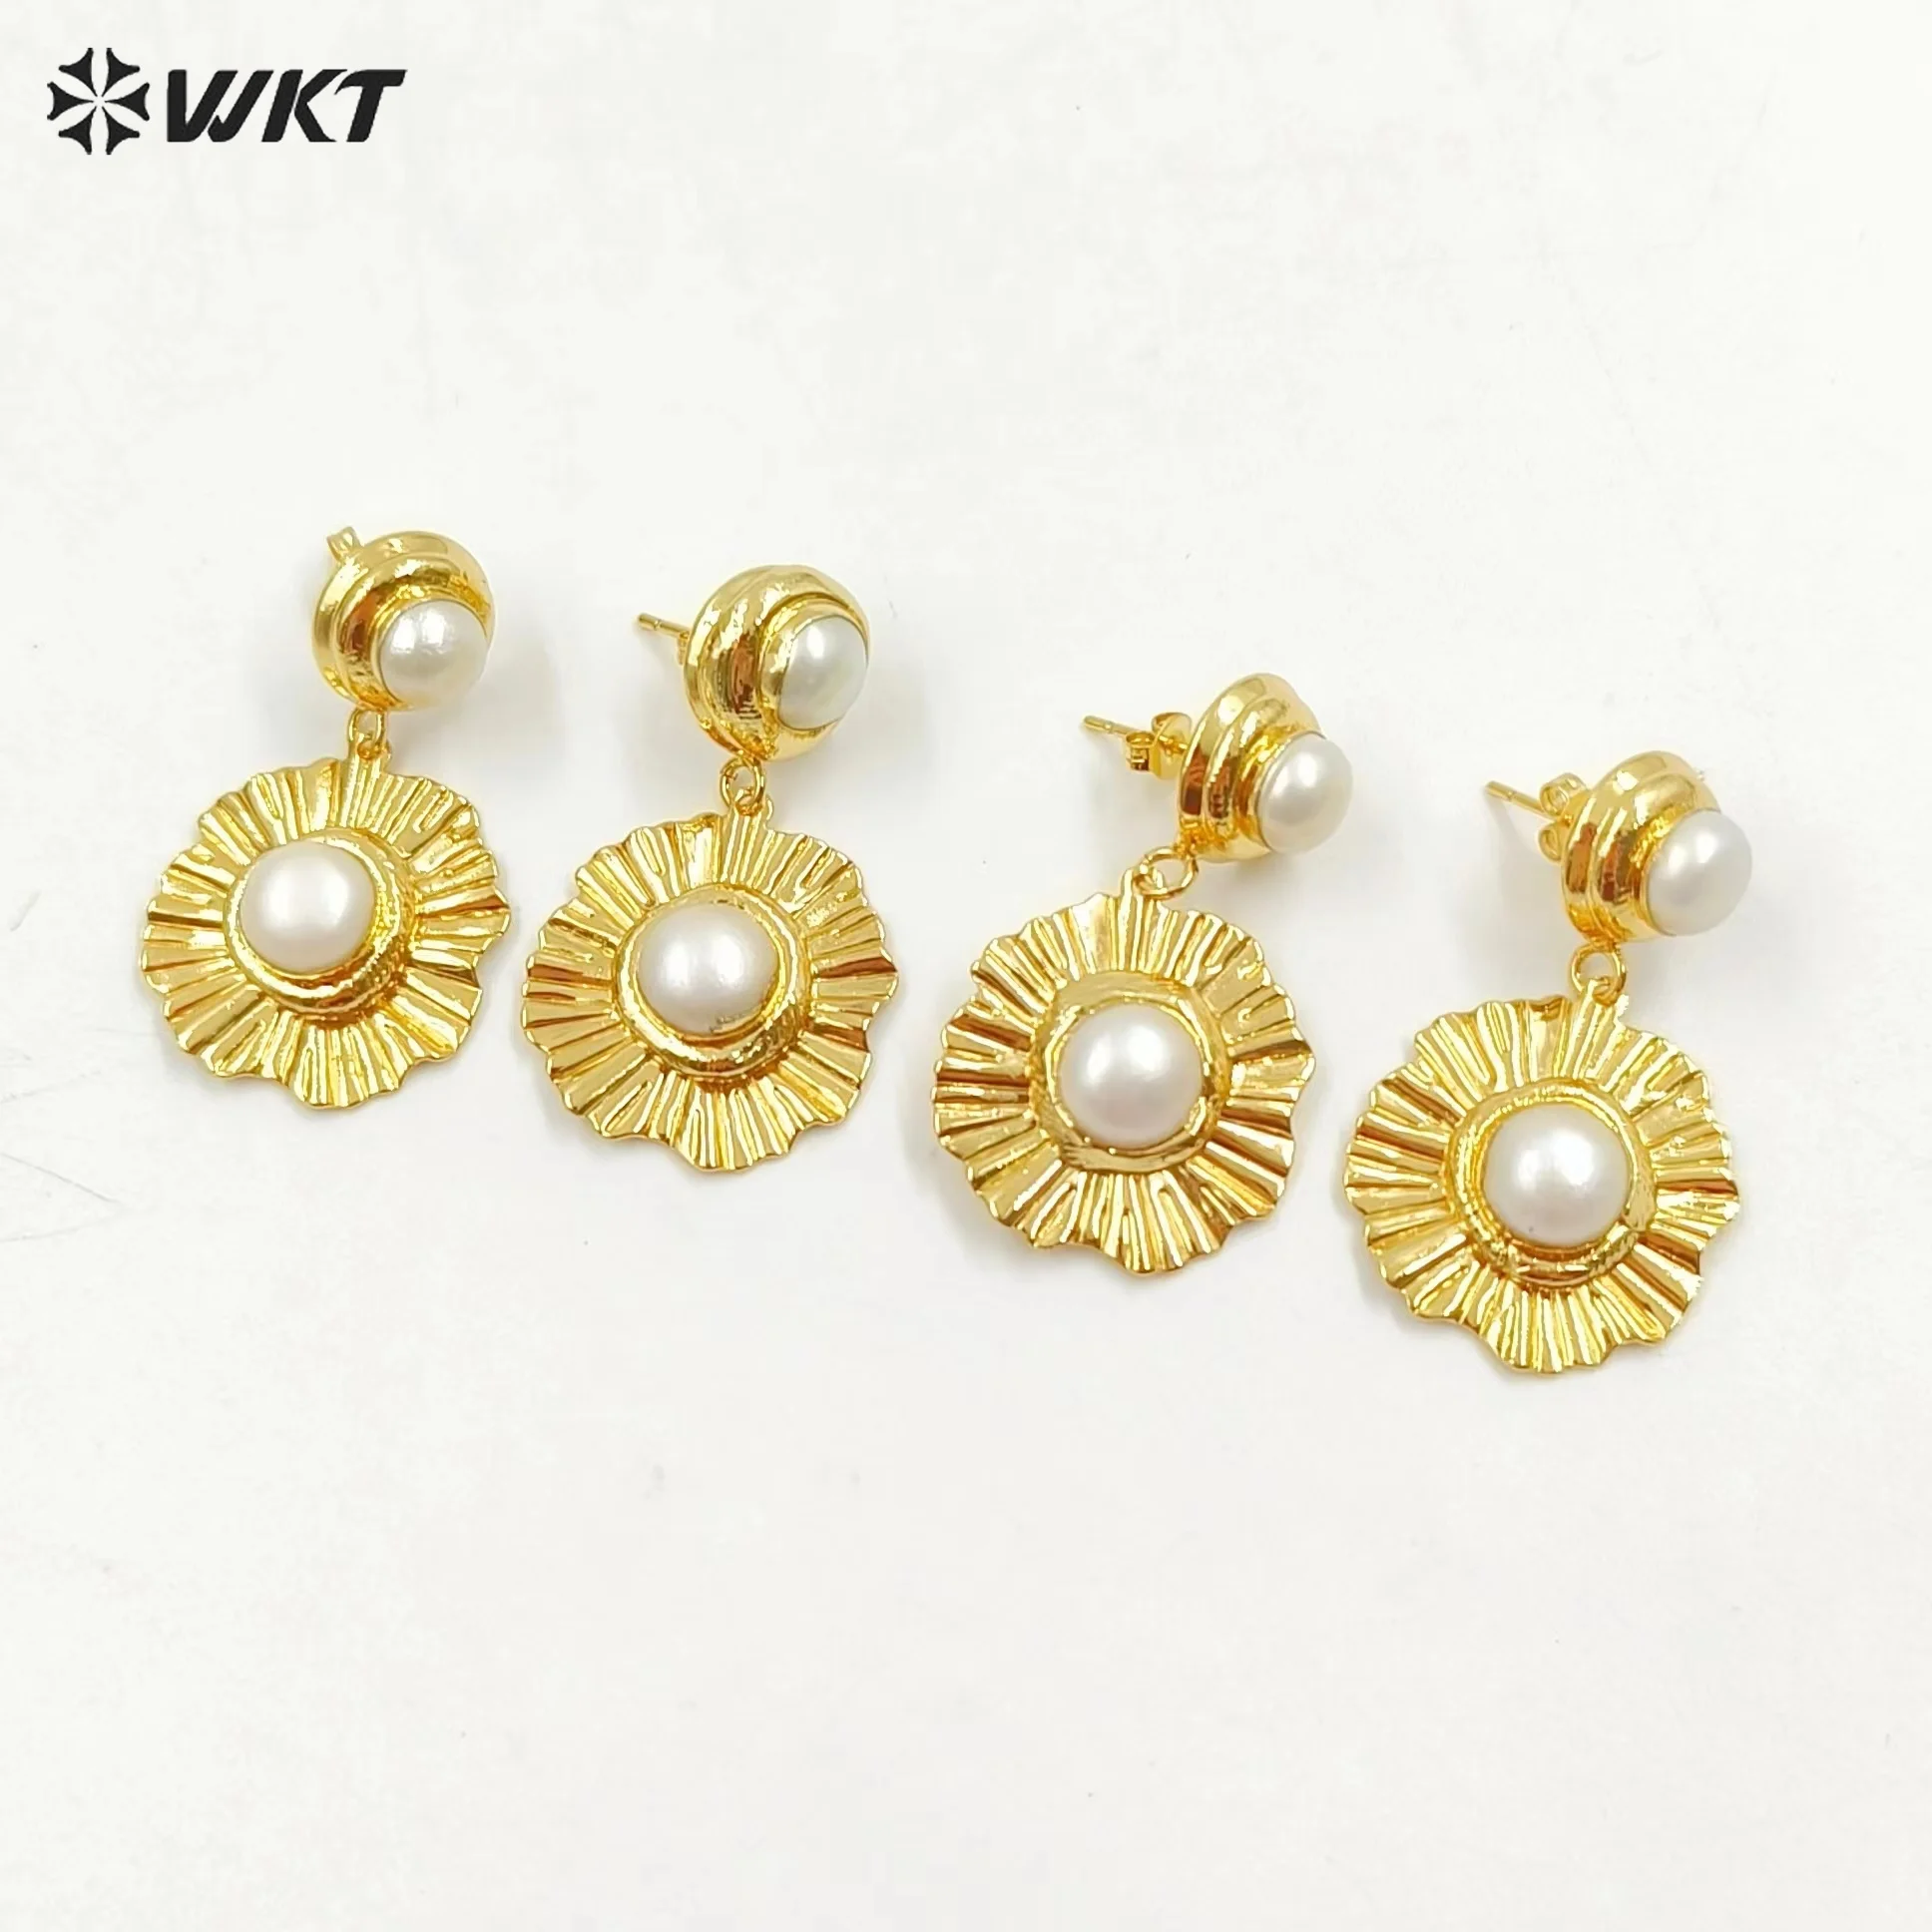 

WT-MPE126 WKT New Design Elegant Women 18K Real Gold Plated Fashion Uneven Metal With Natural Pearl Dangle Earrings